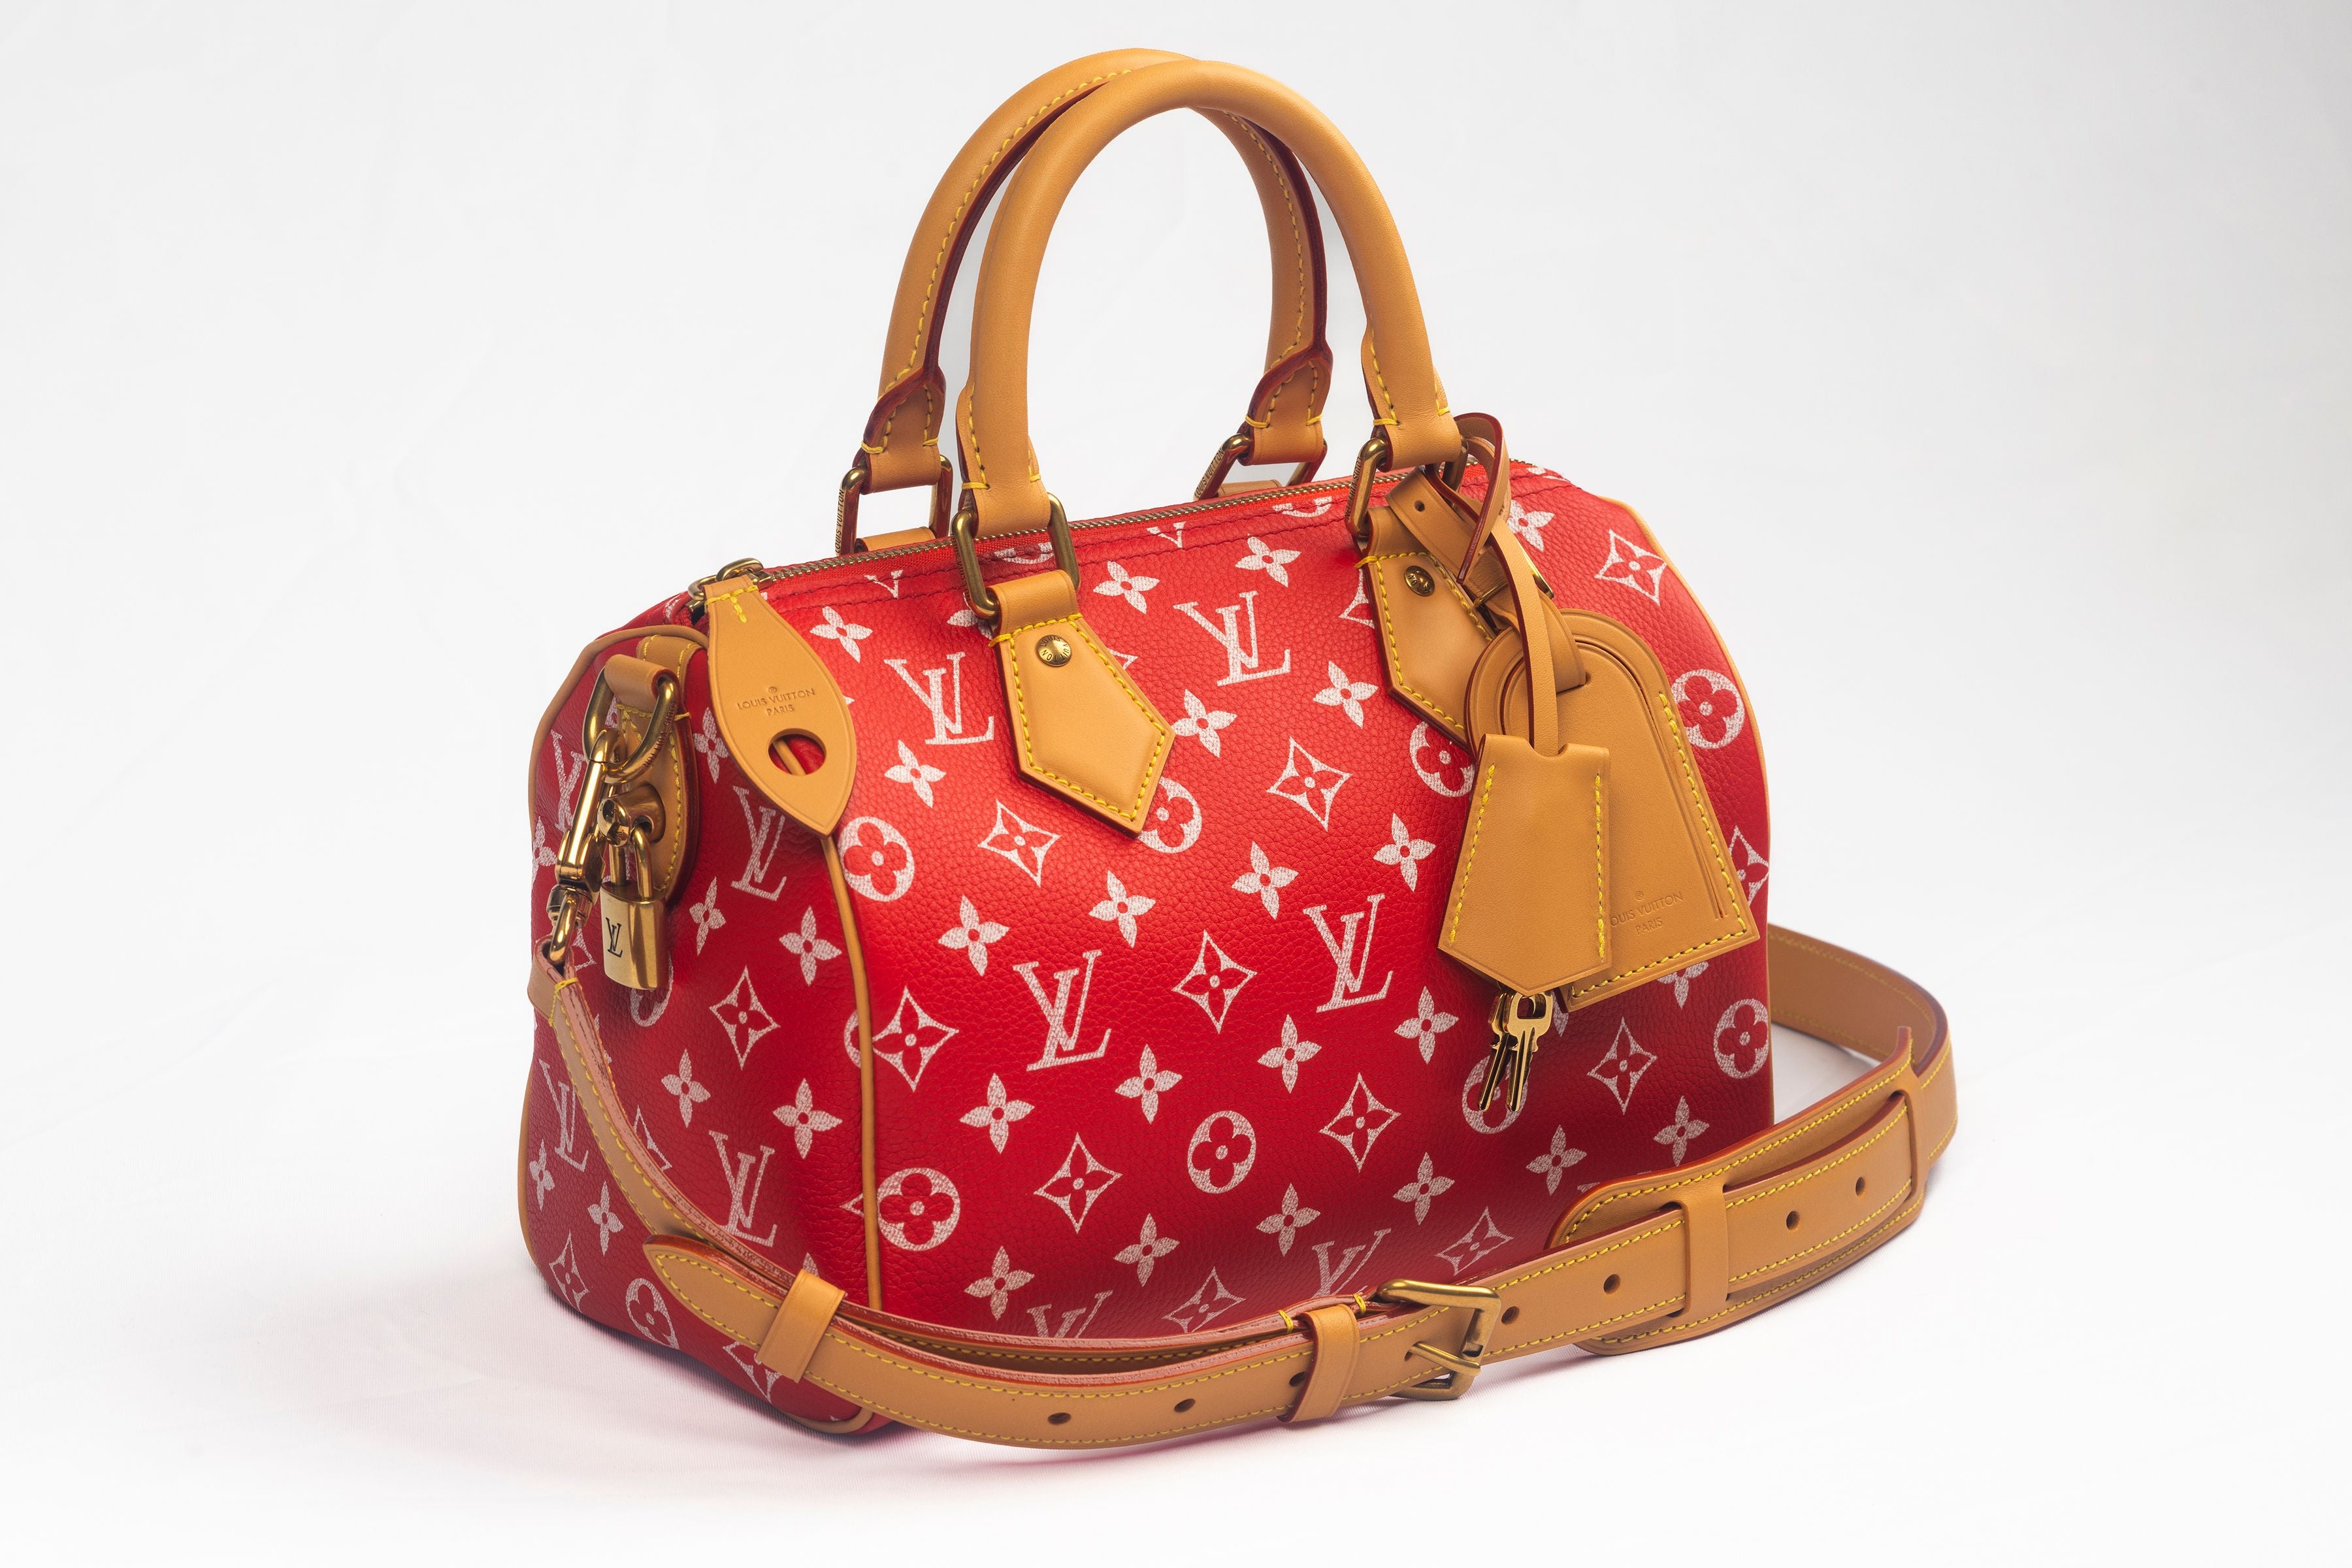 Front view of the Louis Vuitton Speedy P9 Bandouliere 25 showing the straps and tags